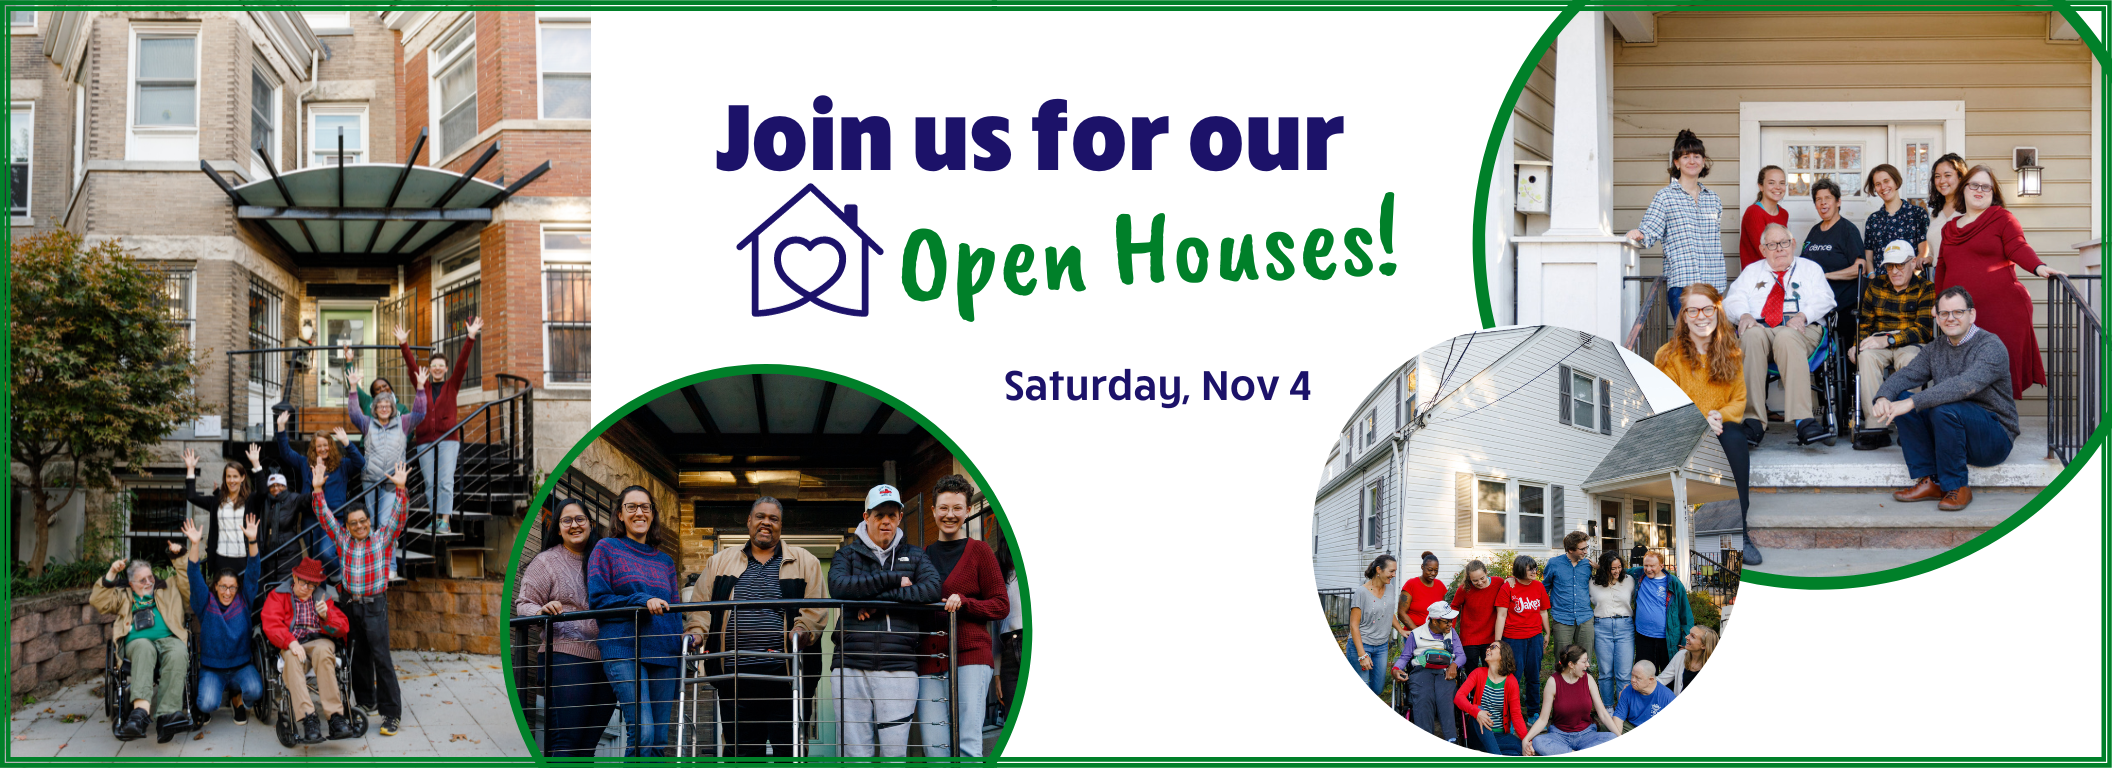 Join us for our Open Houses! Saturday, Nov